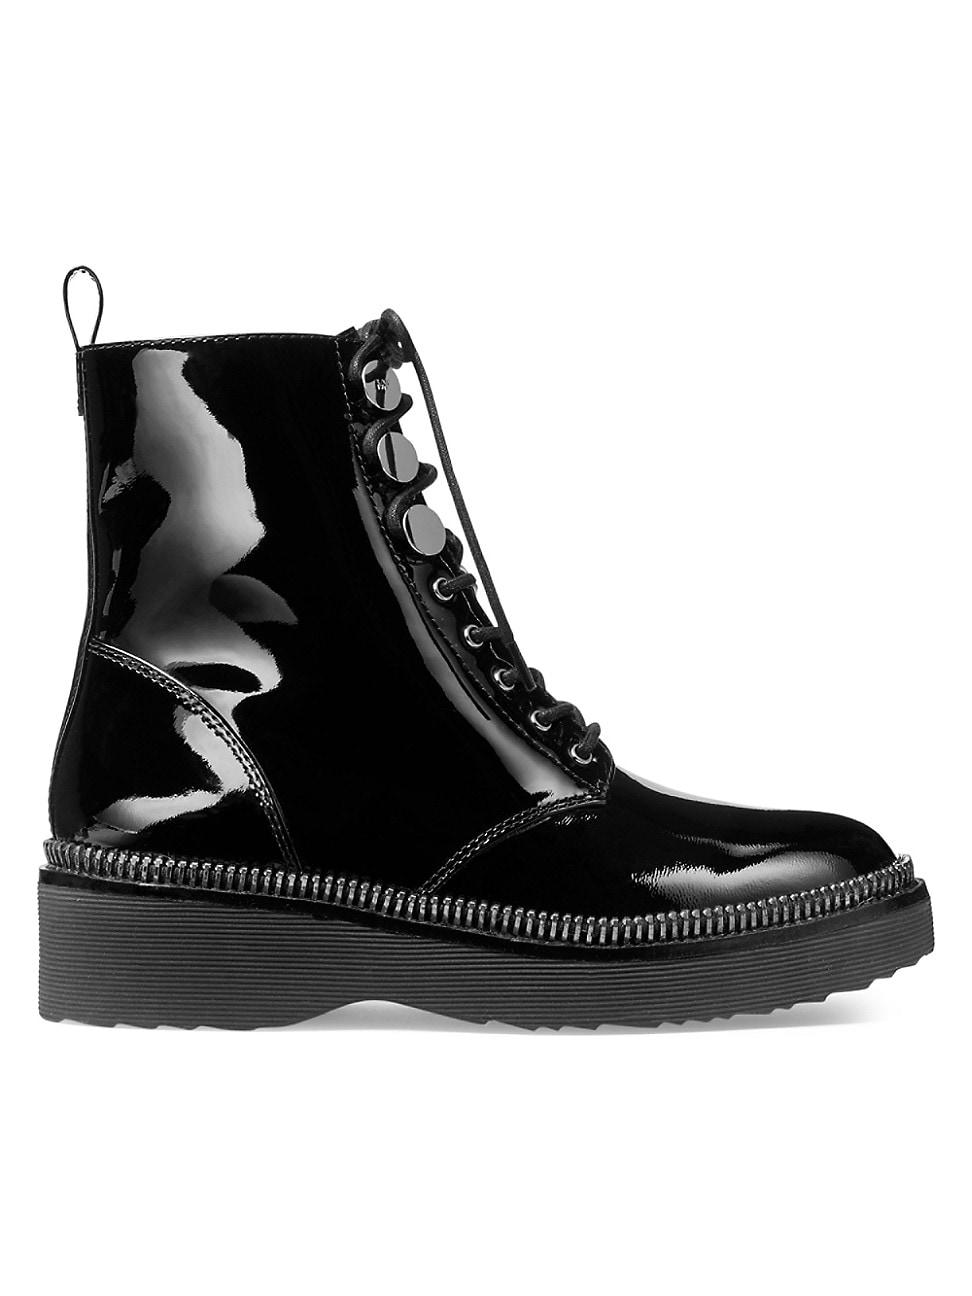 Michael Kors Haskell Patent Leather Combat Boot in Black | Lyst